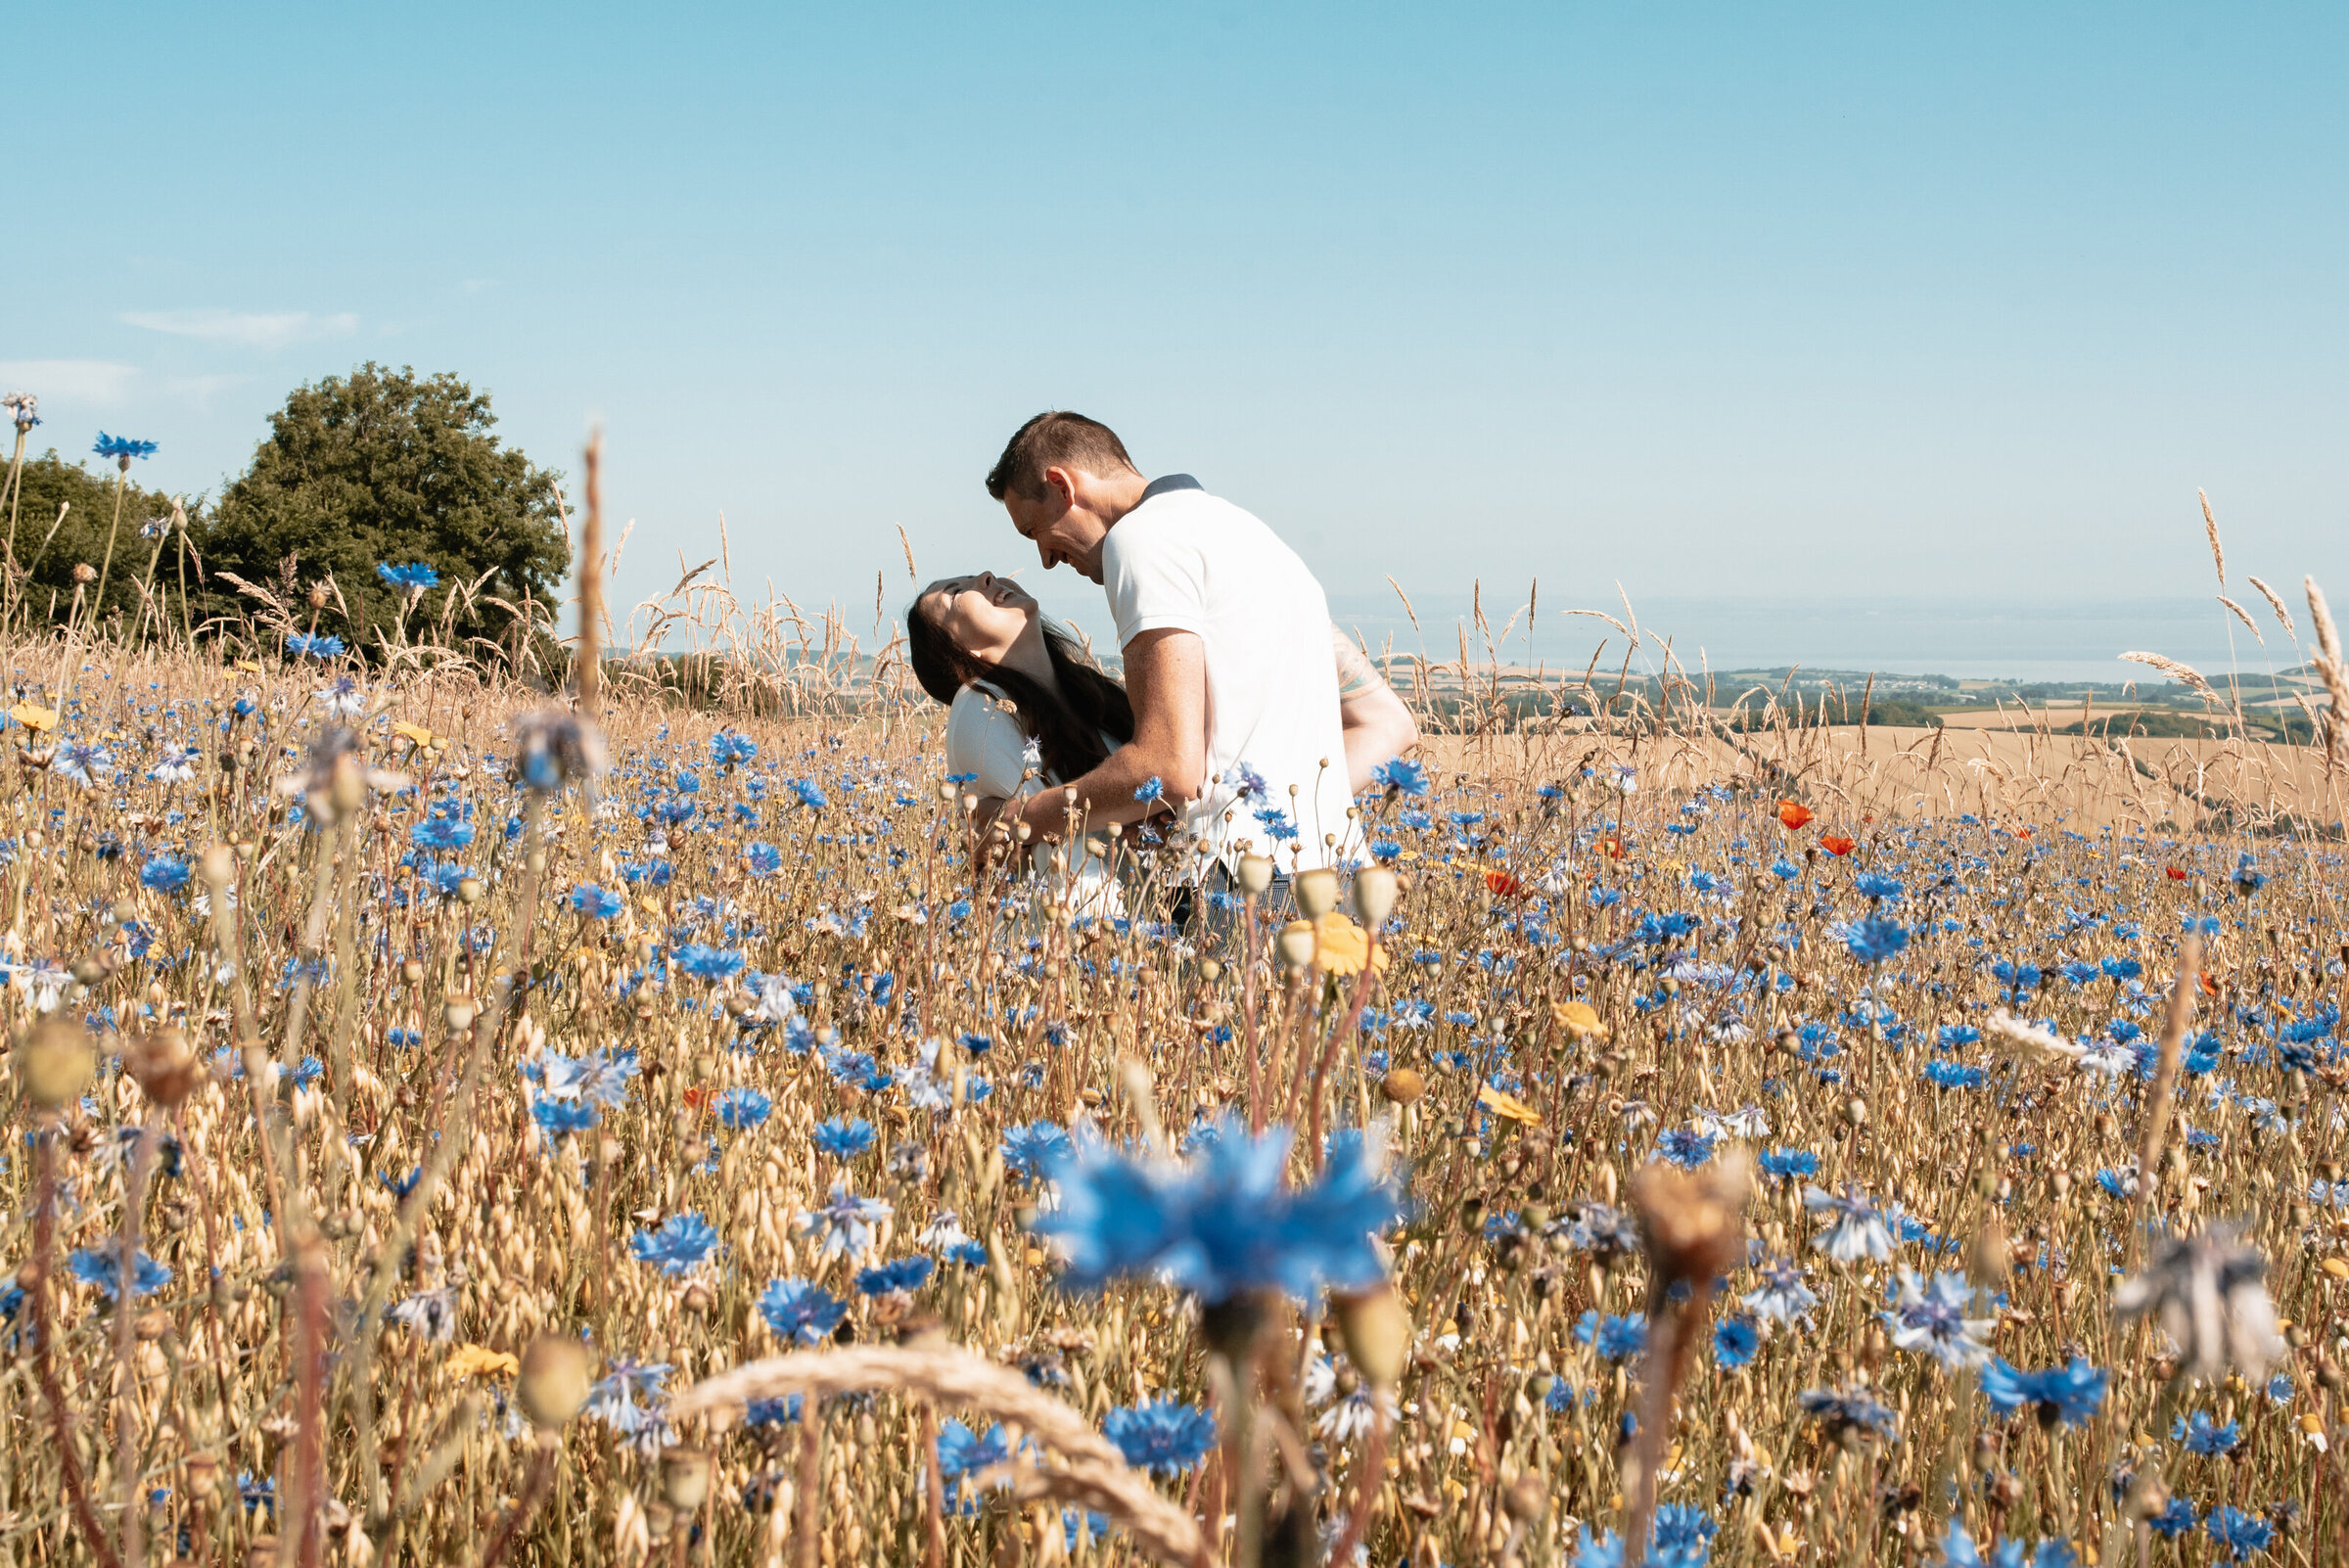 Man tickling woman so much that she is bending backwards and laughing, in a wildflower meadow surrounded by flowers